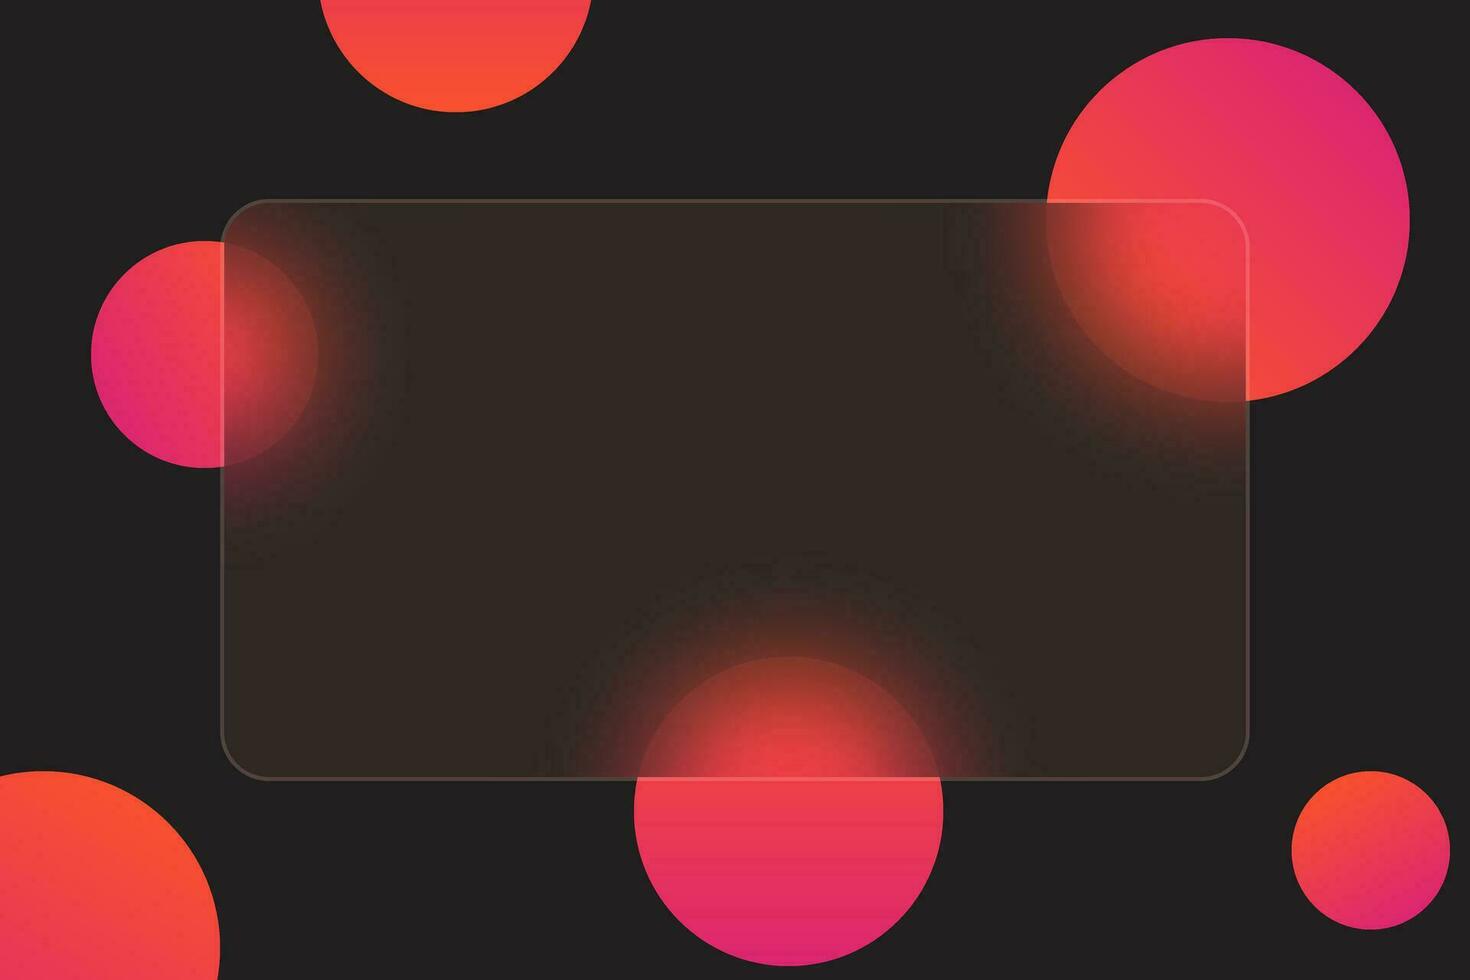 Digital abstract background of bright neon circles with glass morphism rectangular plate in the center. Horizontal modern banner template with translucent frame for text. Vector illustration